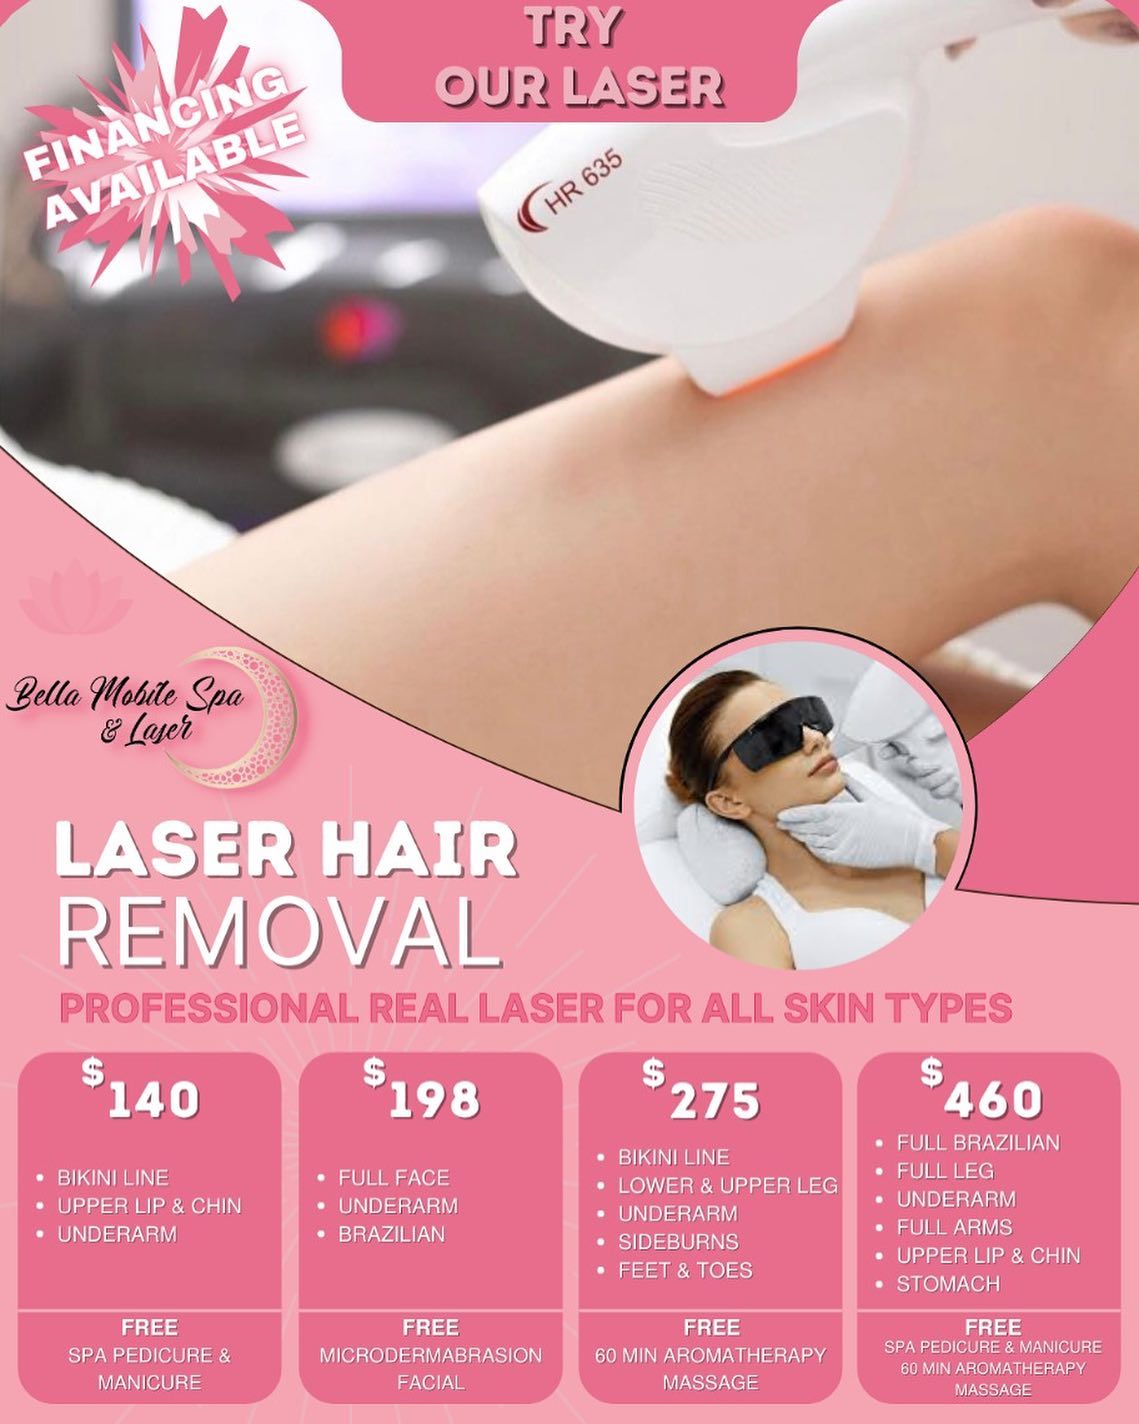 LASER HAIR REMOVAL 

Remove Hair Permanently 
Safe & Effective 

Tired of shaving every day?  Having trouble with ingrown hairs, bumps, cuts, hyperpigmentation and infections? 

✨LASER HAIR REMOVAL is the safest, most effective way to be rid of unwanted  hair, permanently 

✅Neck
✅Arms
✅Legs
✅Back / Chest
✅Abdomen
✅Brazilian
✅Bikini line 

#painfree #londonontario #hairremovallaser #guarantee #dontmissout #packagedeals 

📍London,On
📱 519-636-3575
📧 info@bellamobilespa.ca